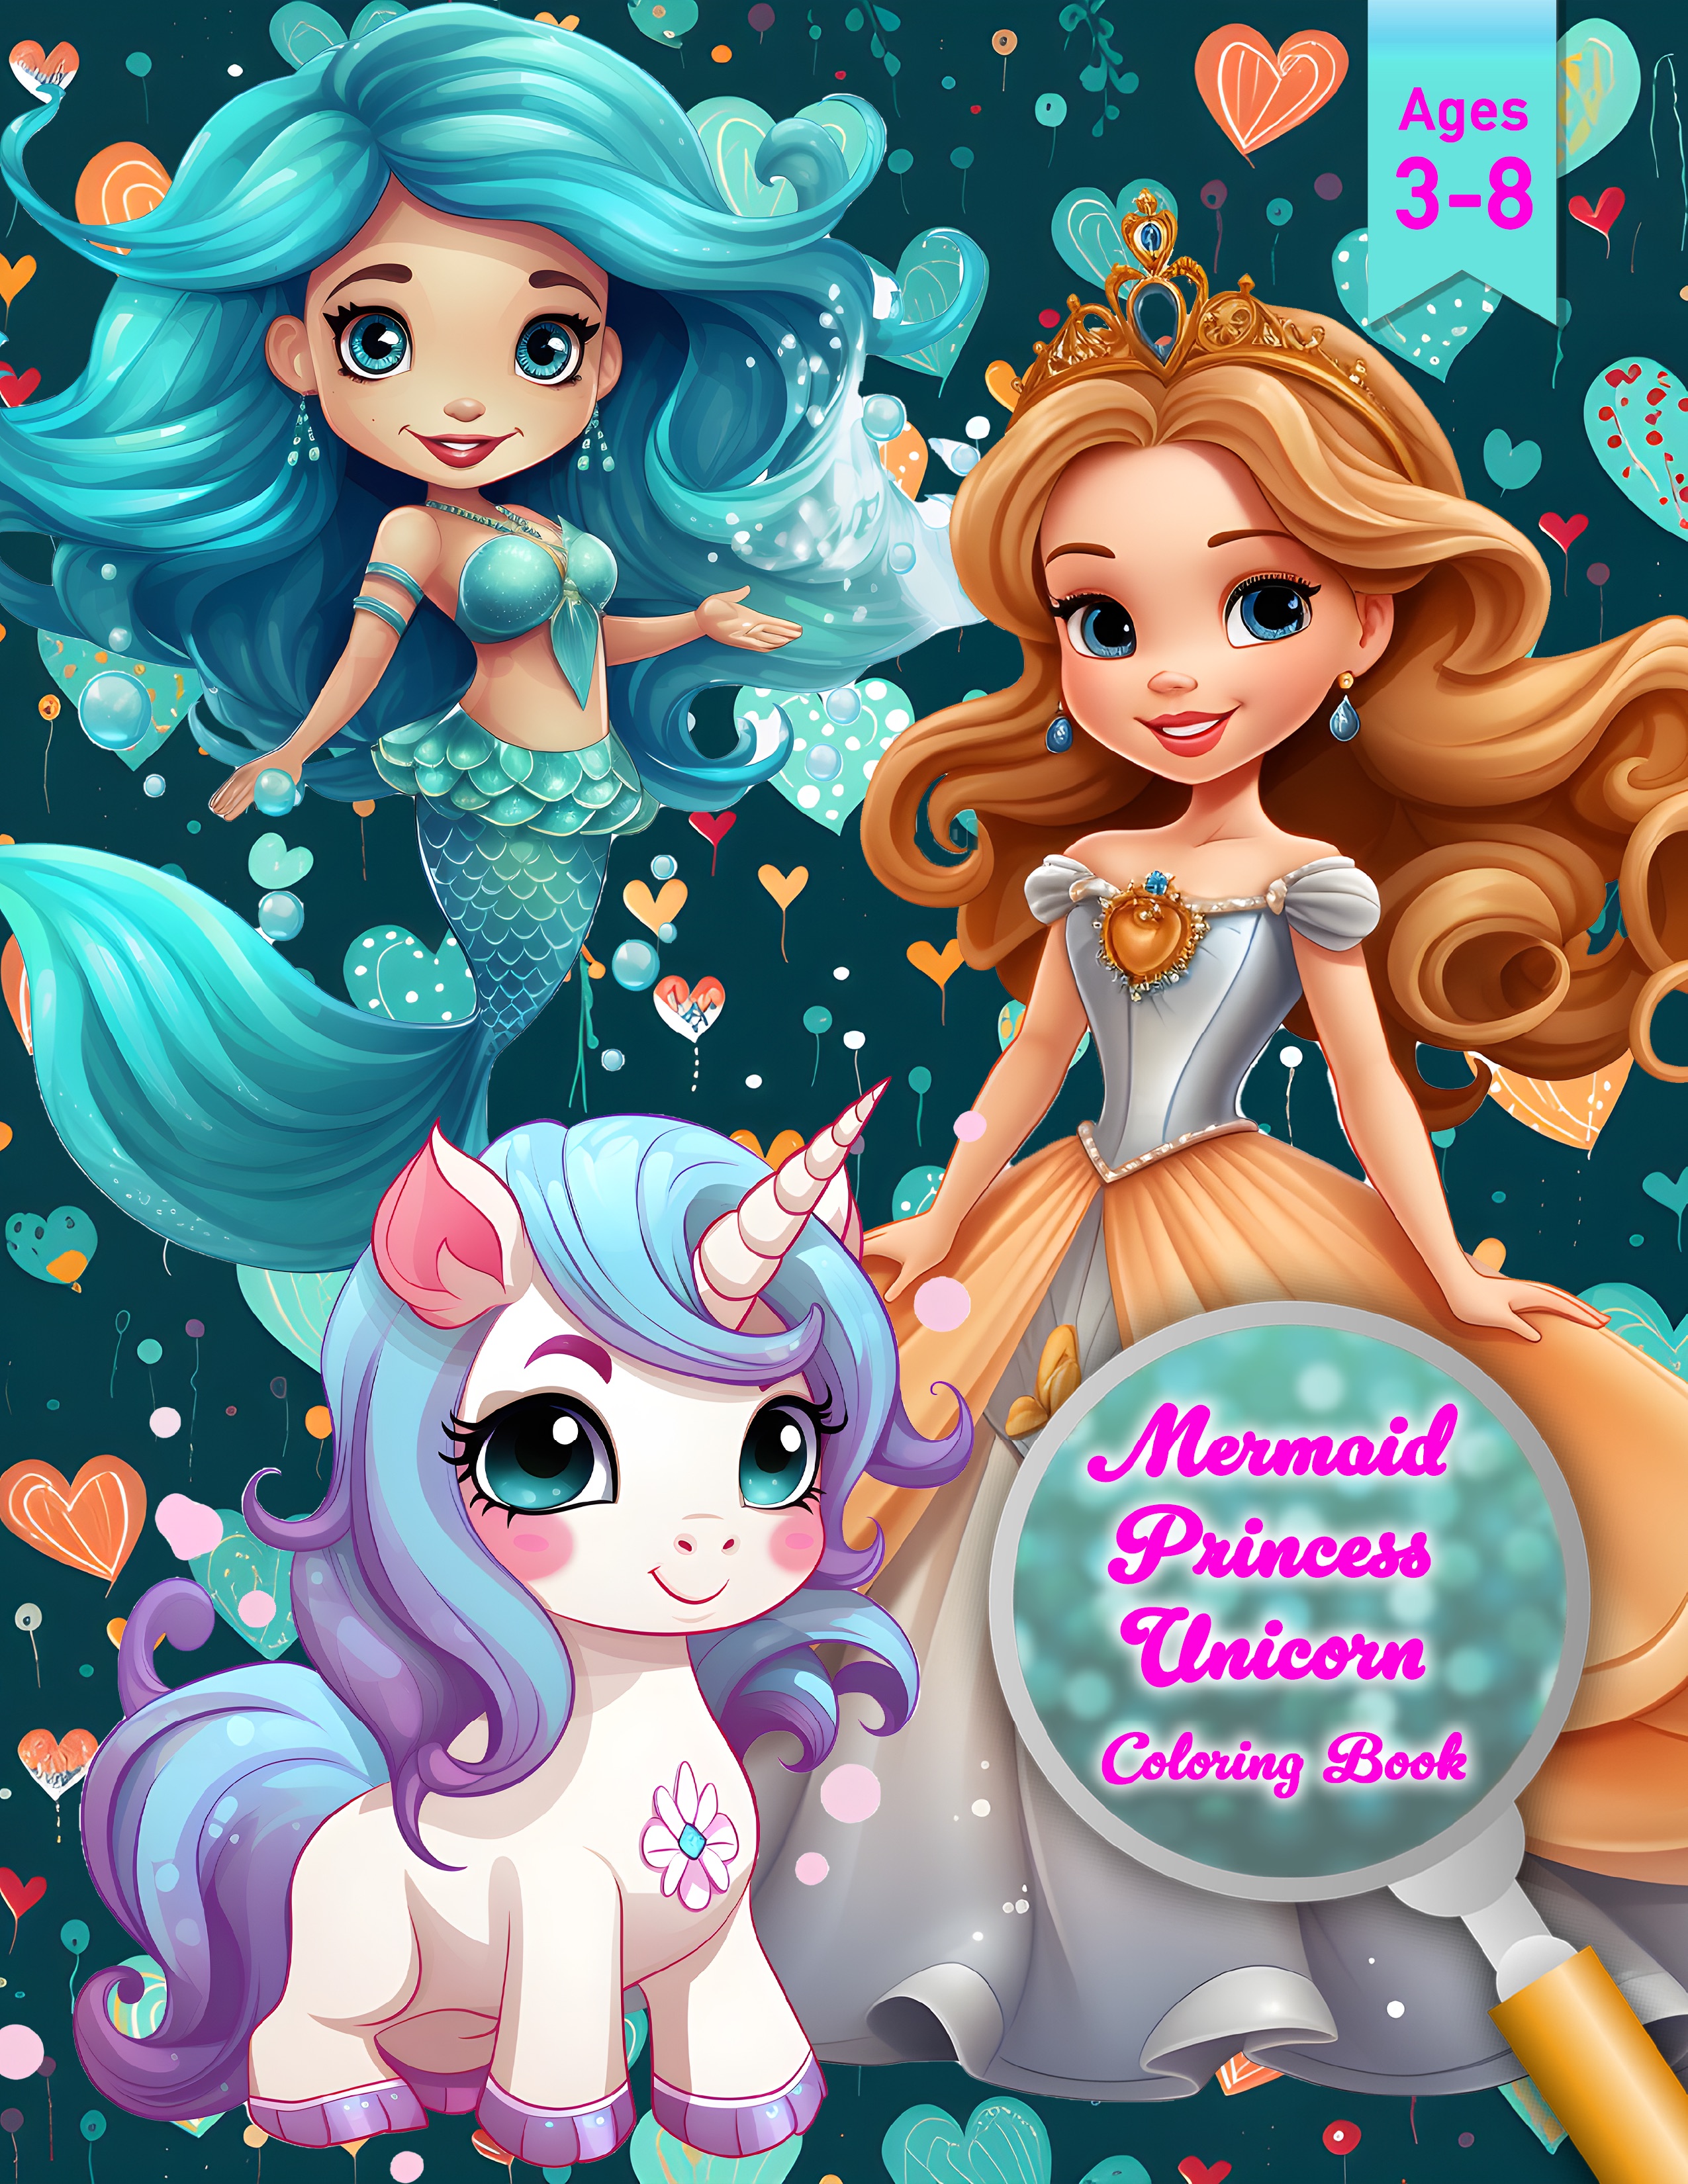 Mermaid Princess Unicorn Coloring Book Ages 3-8: Dive into a Magical World of Coloring Fun! Adorable Creativity for Preschool, Kindergarten, and Girls Fine Motor Skills